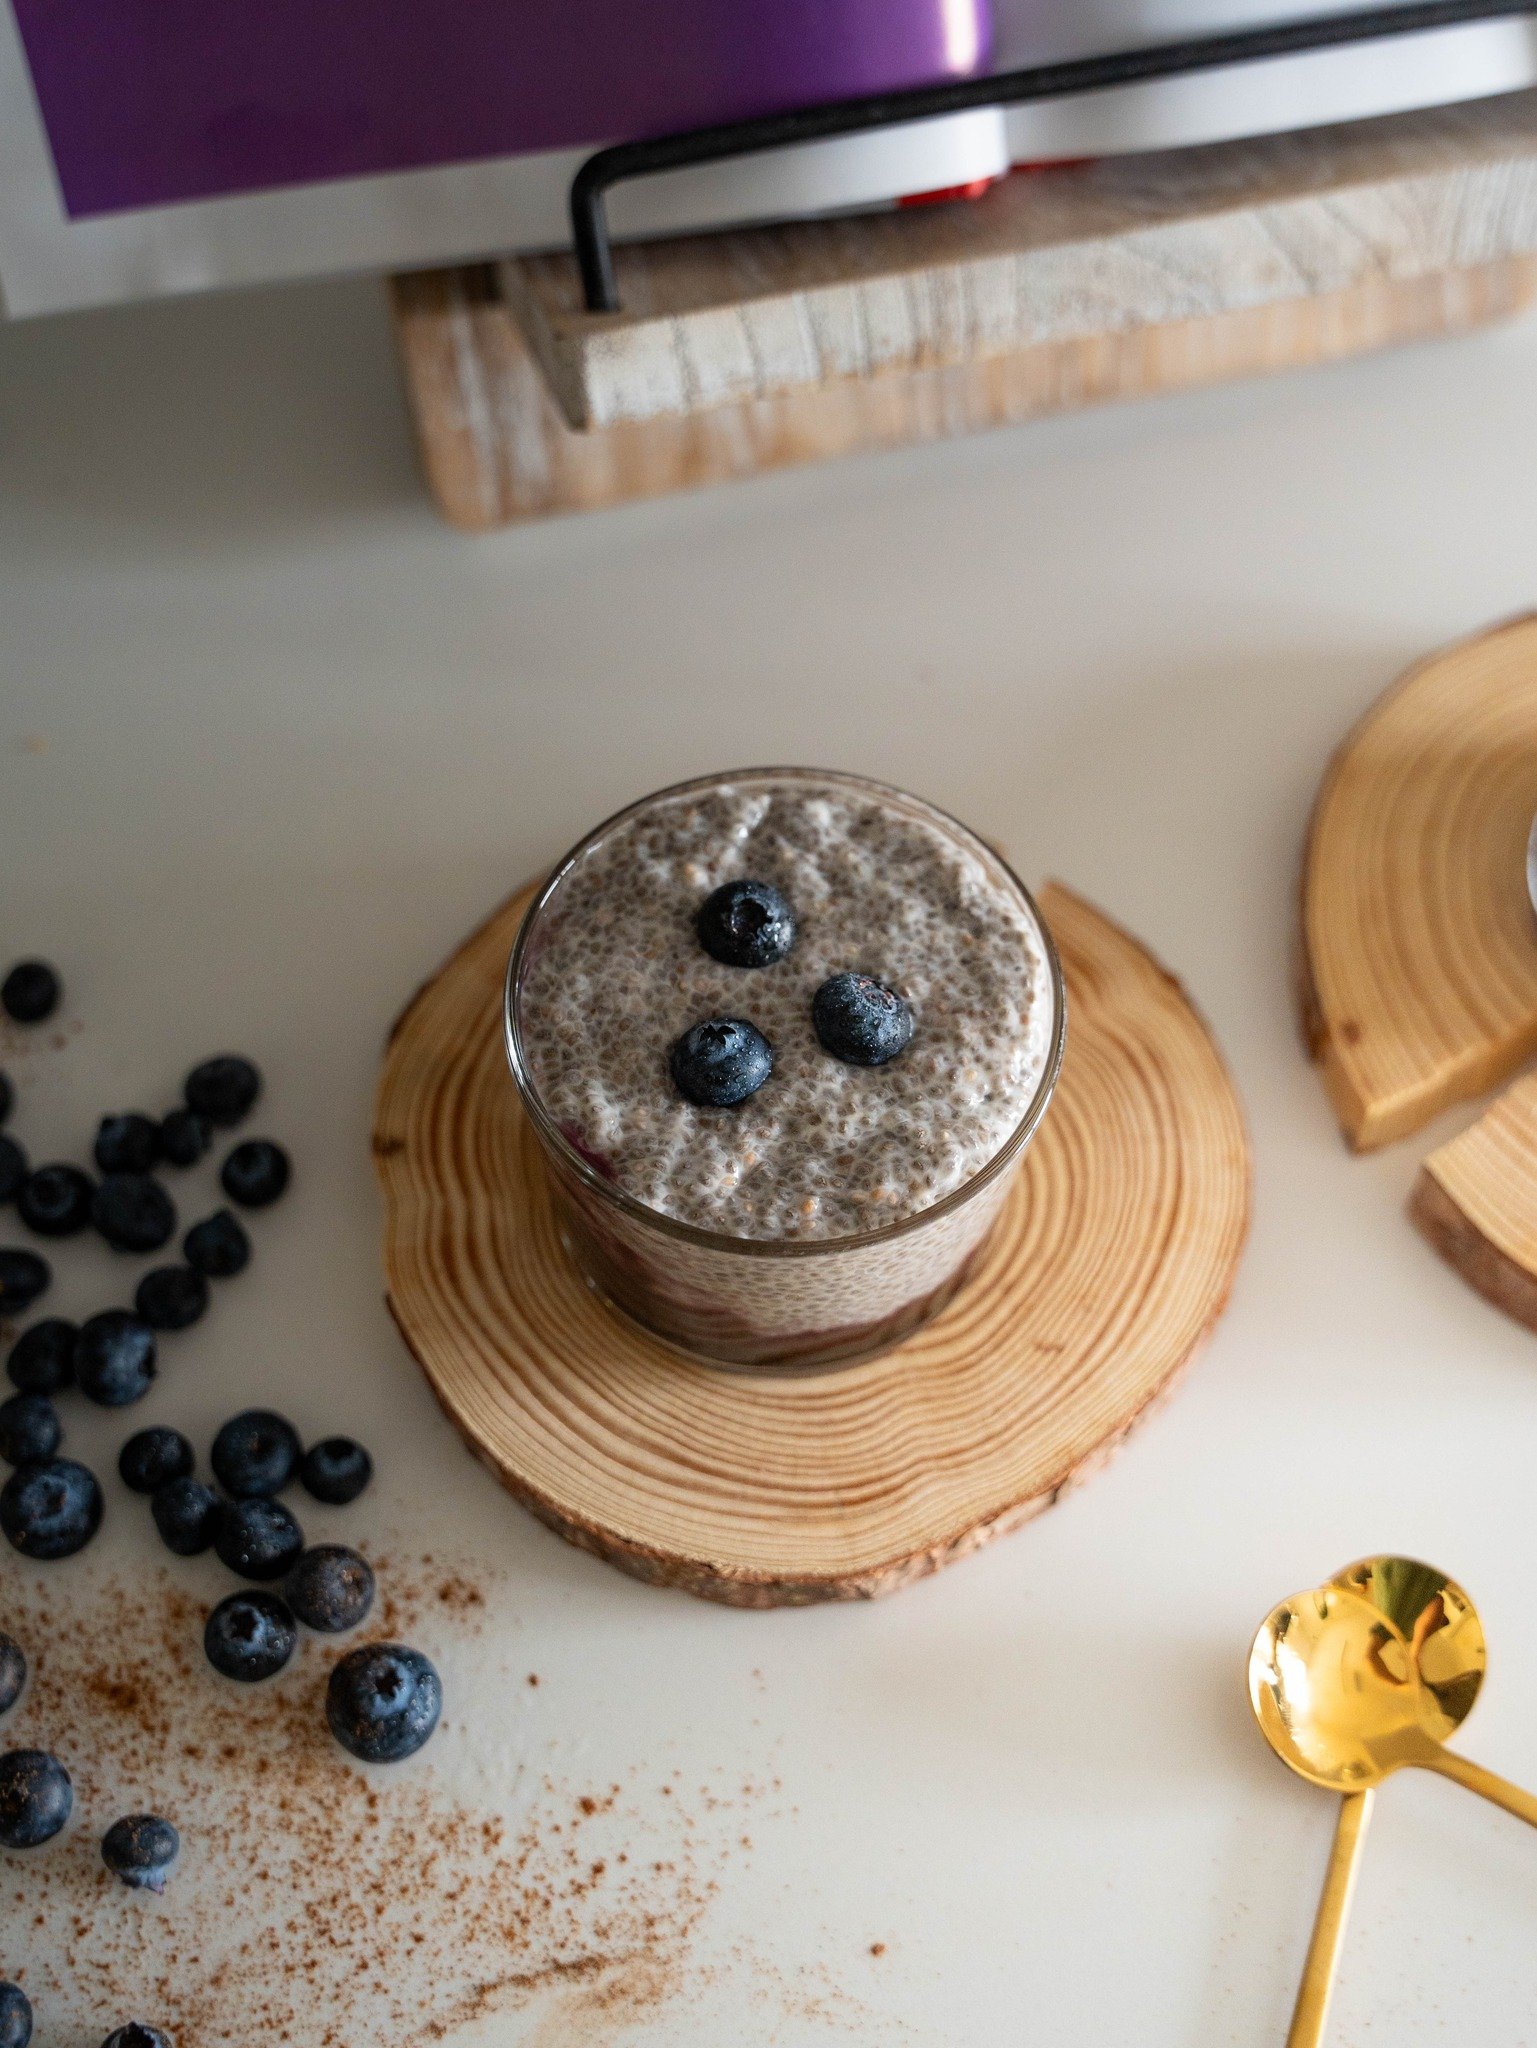 ✨CHIA PUDDING✨

At Unrefined, we truly value your feedback!! We were hearing that customers wanted an oat free sweet option... so thats what we did!! 

Chia pudding is a fun, light, spring and summer dish!

It&rsquo;s made with simple ingredients and